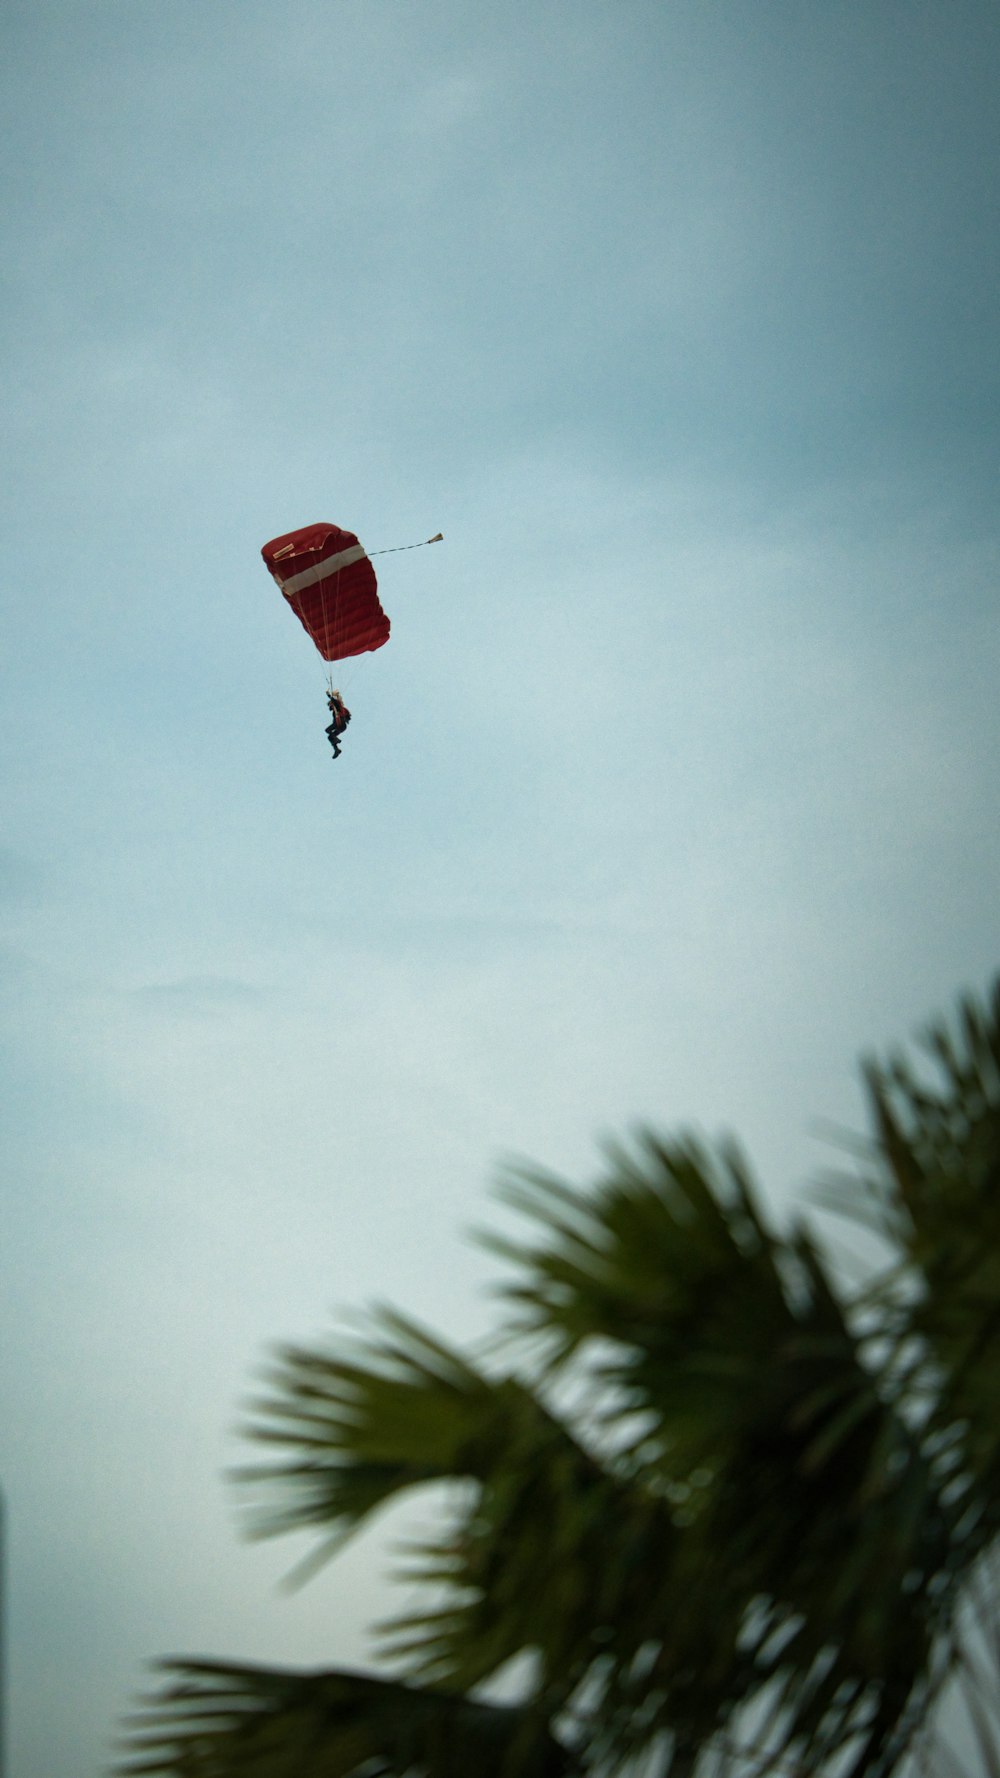 person in red parachute under white sky during daytime